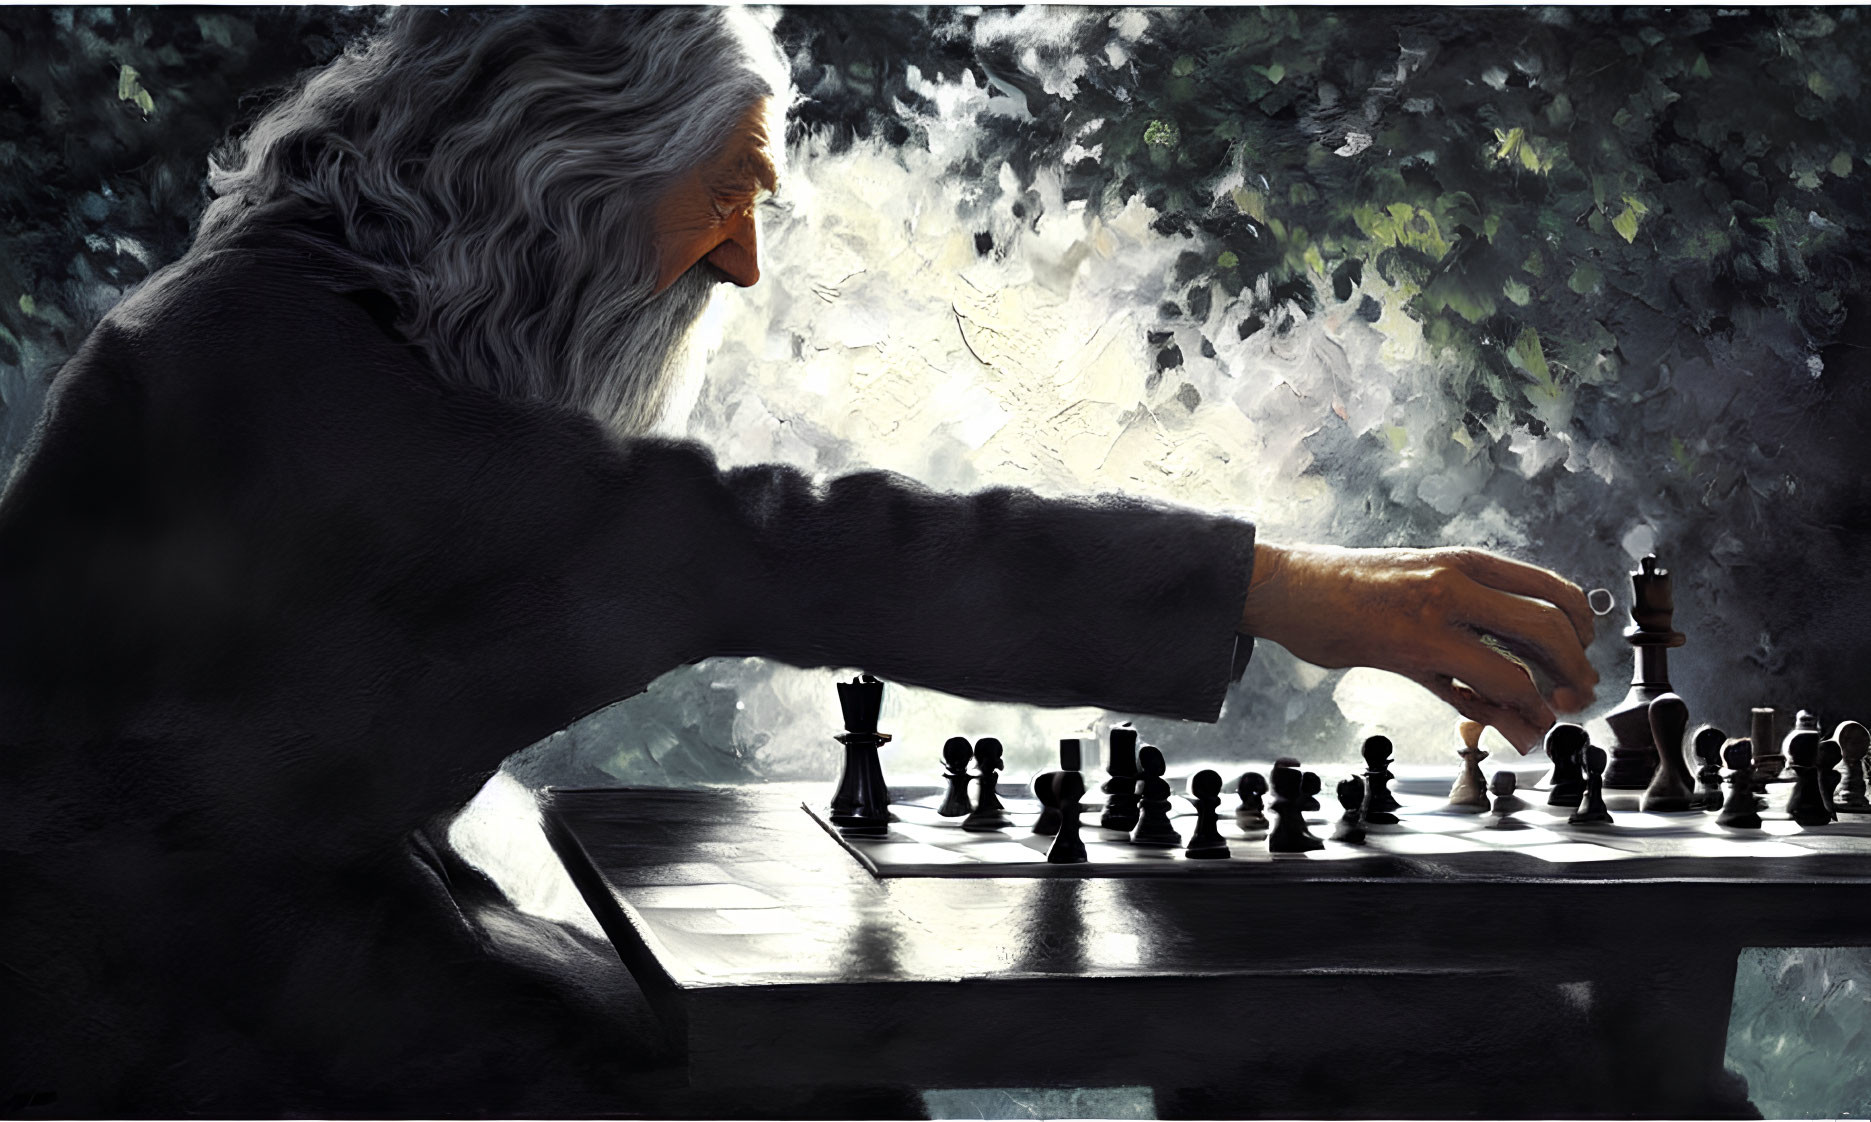 Elderly man with white hair and beard playing chess game